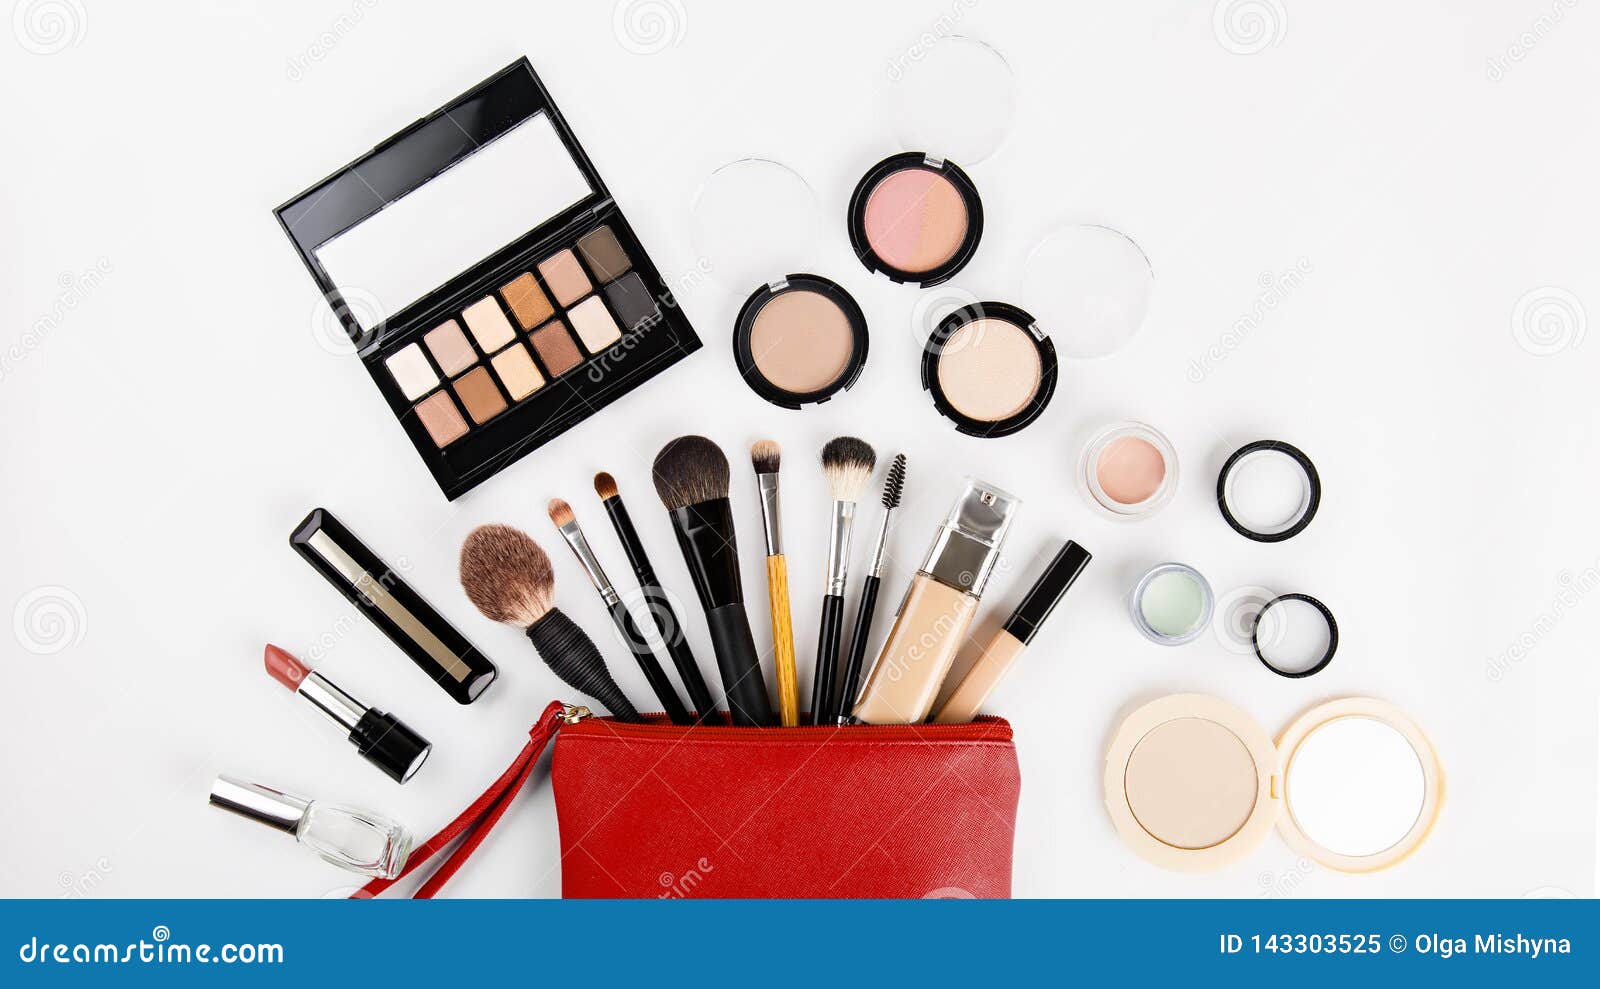 174,574 Beauty Products Stock Photos - Free & Royalty-Free Stock Photos  from Dreamstime